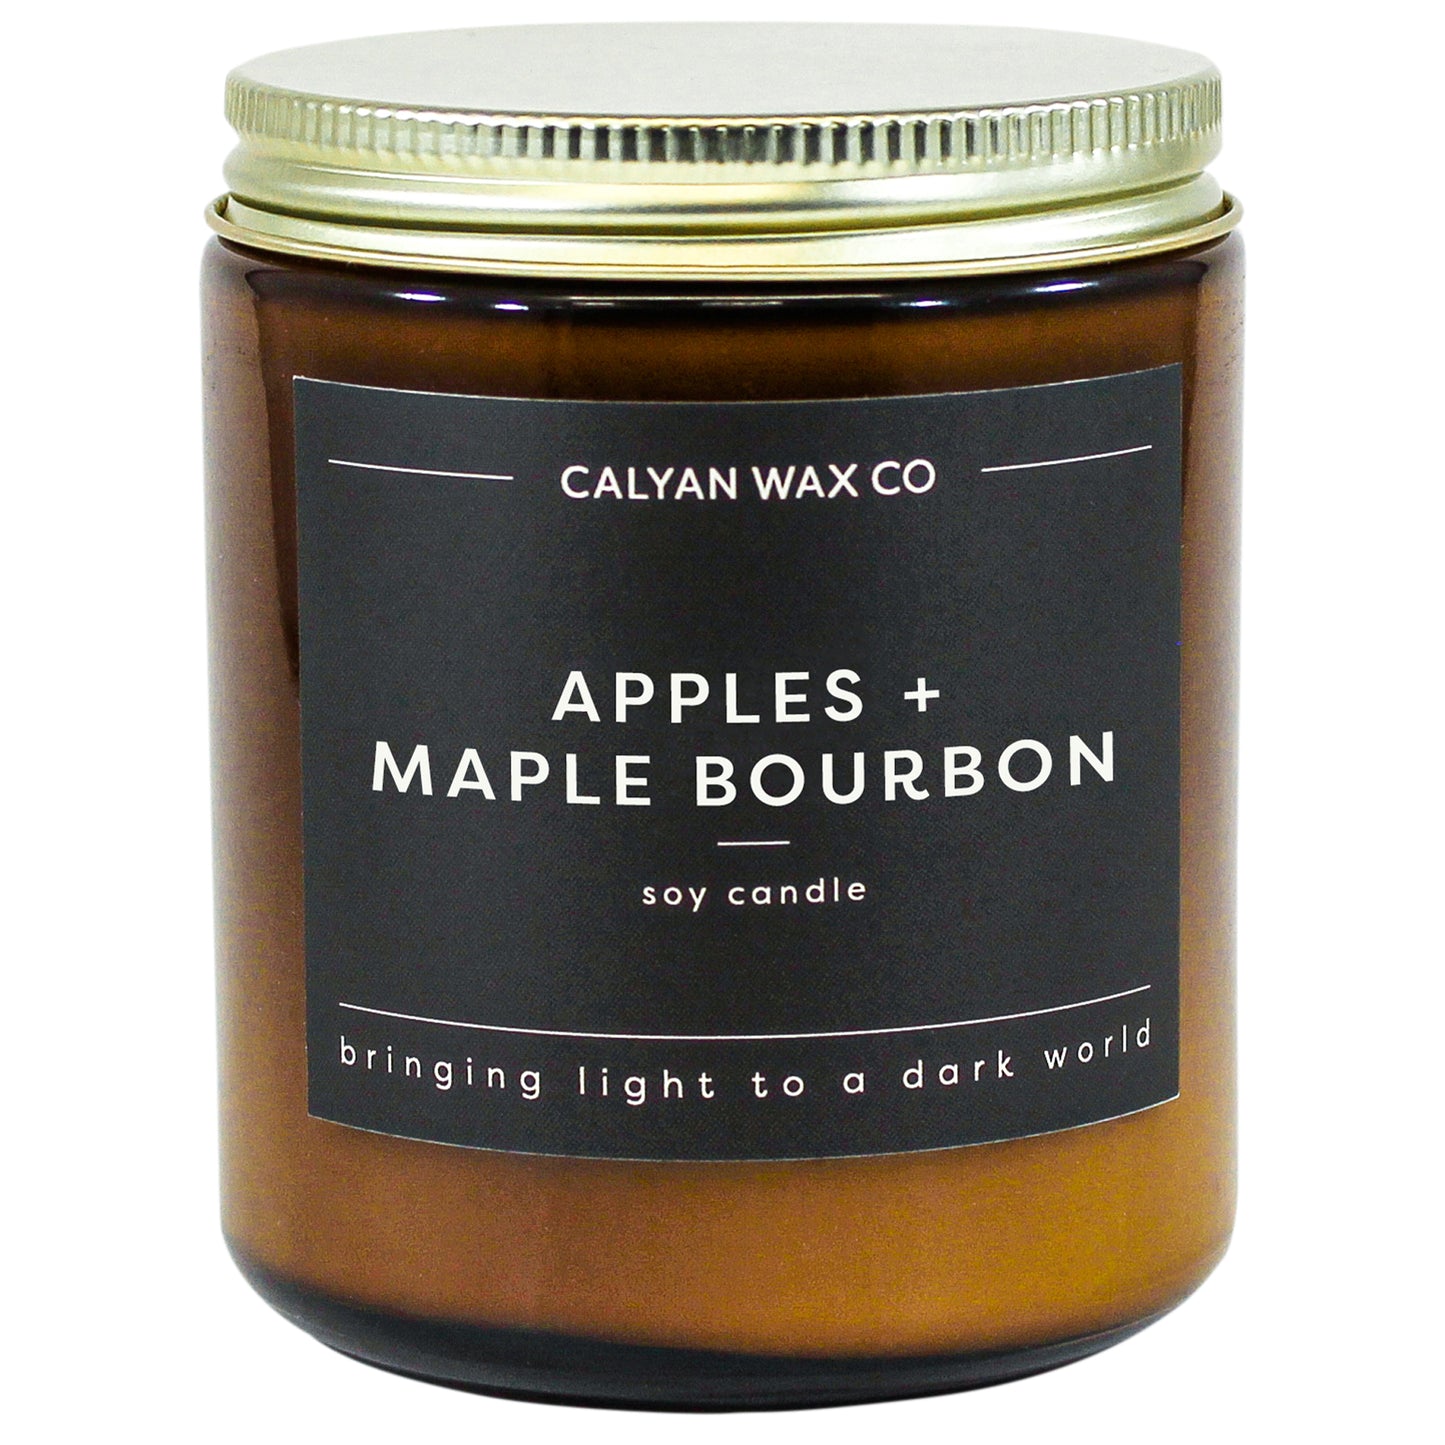 Apples + Maple Bourbon Soy Candle